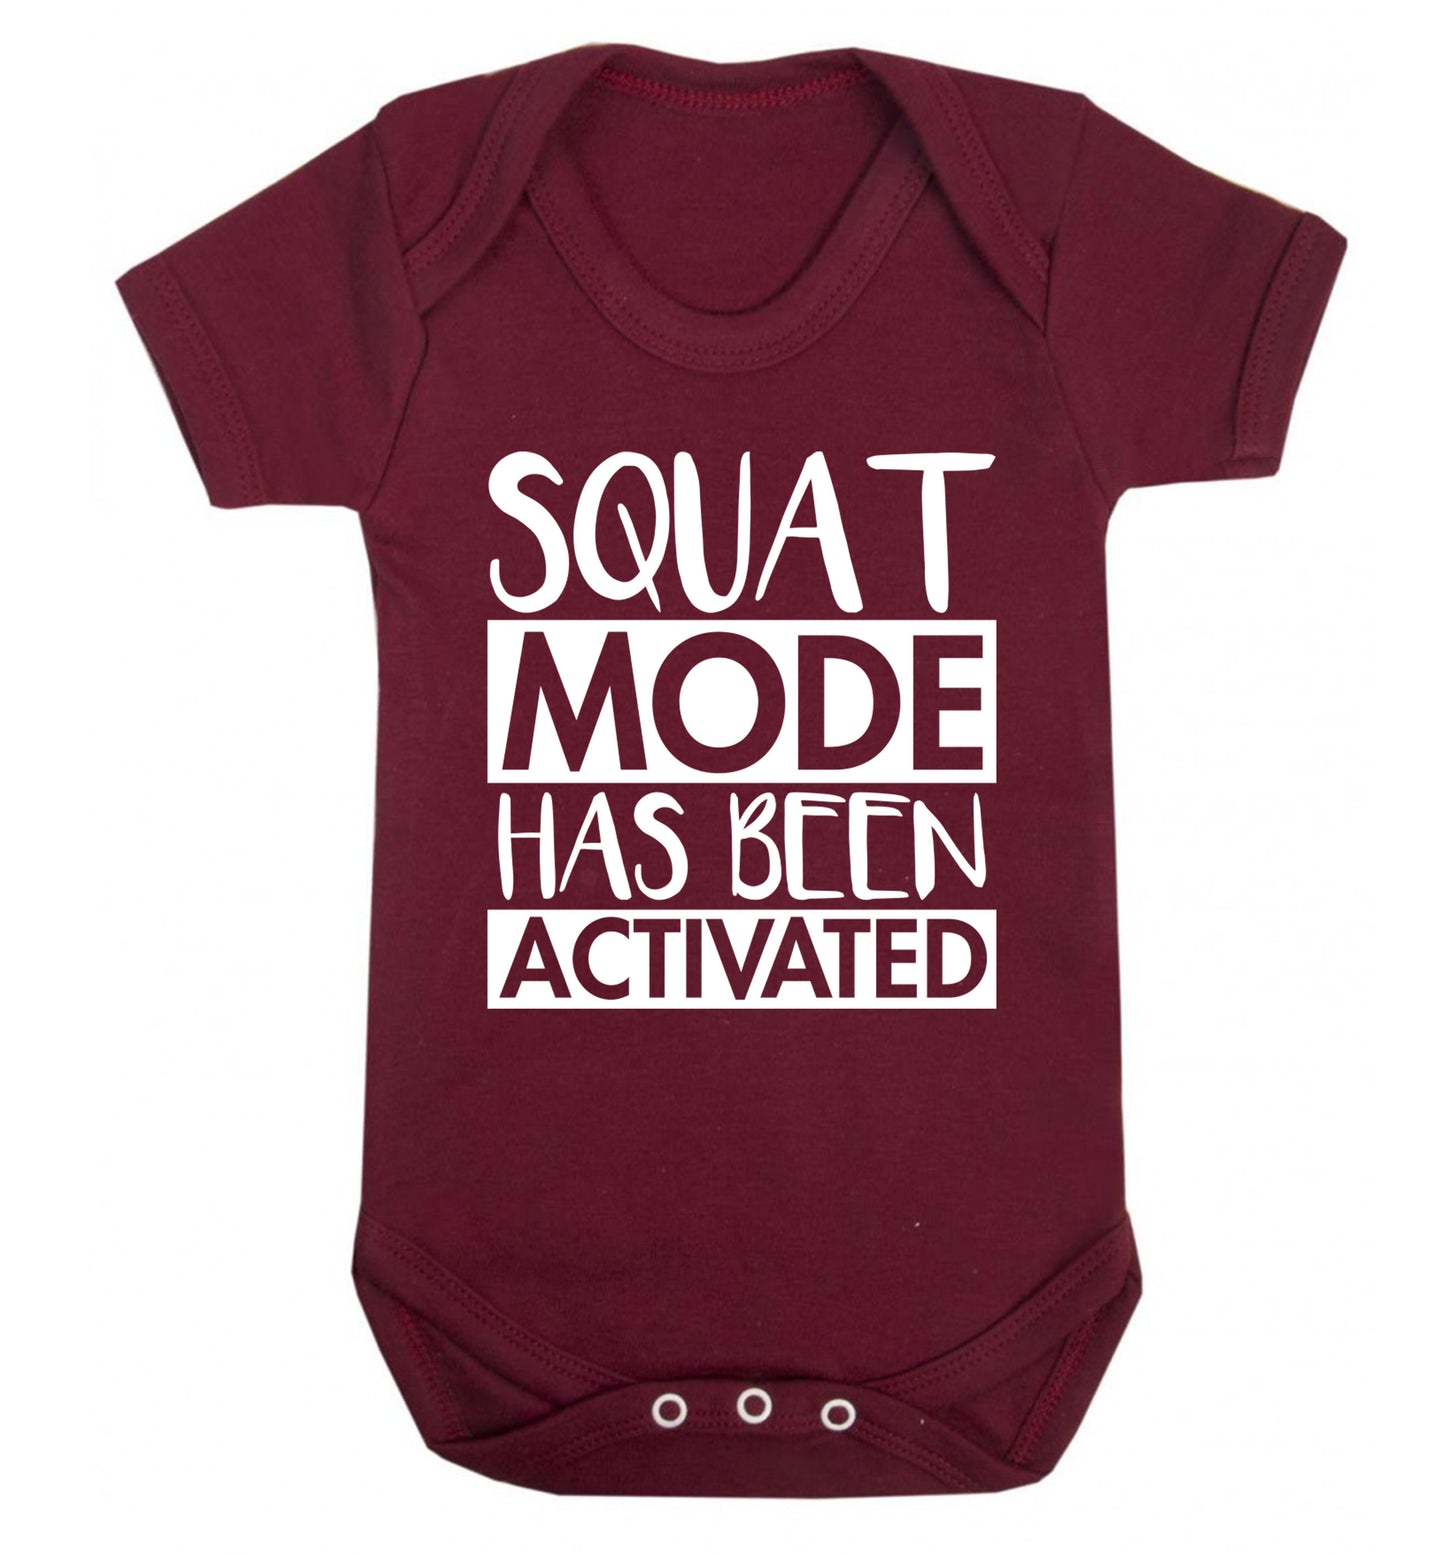 Squat mode activated Baby Vest maroon 18-24 months